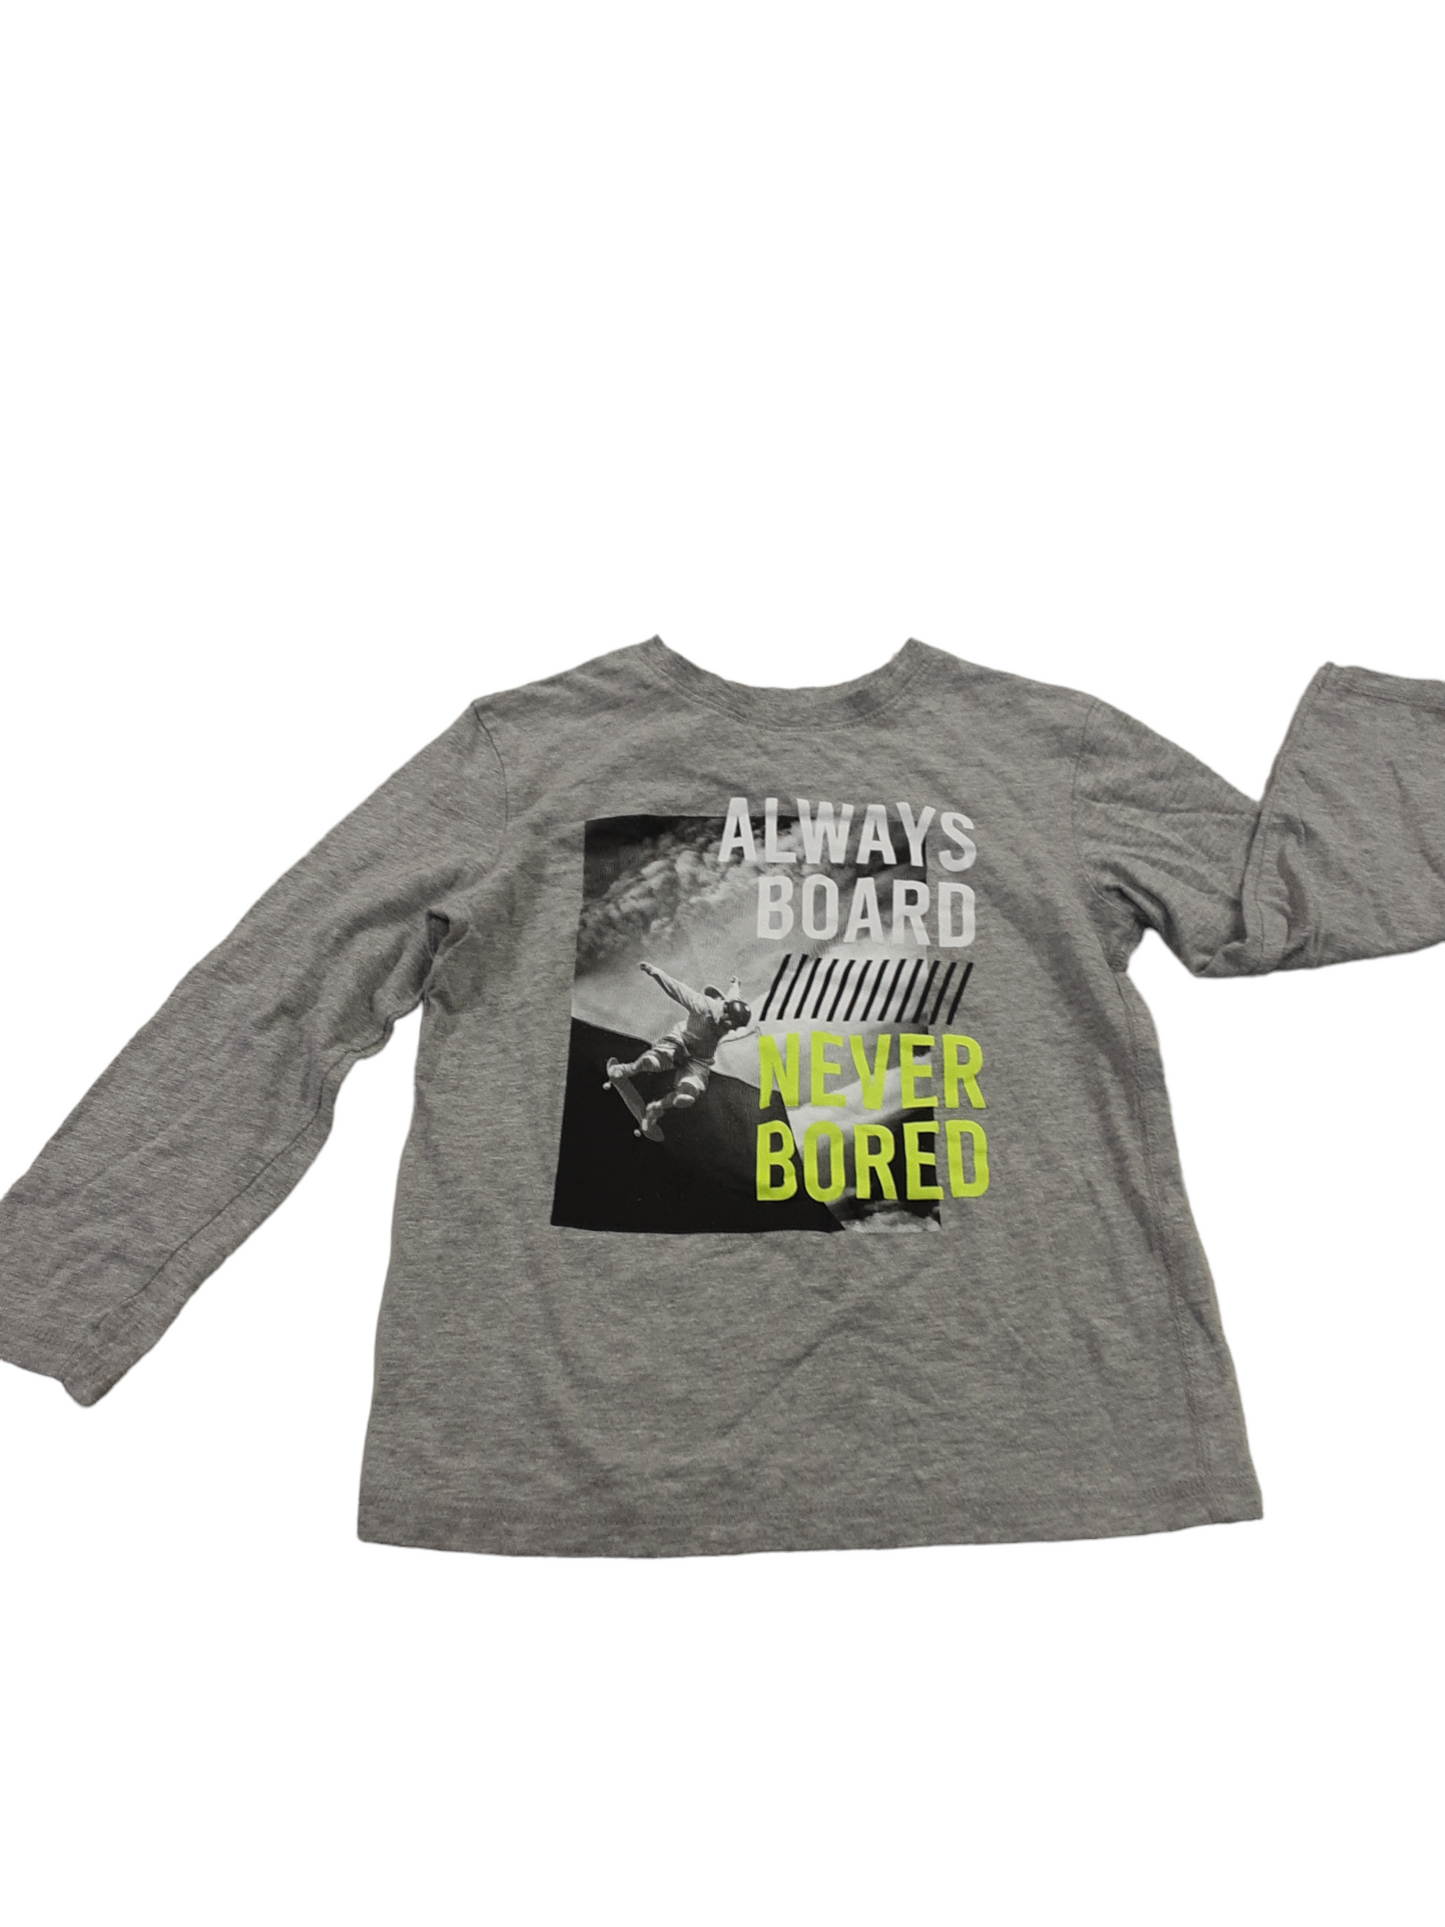 Always Board Never Bored top size 6